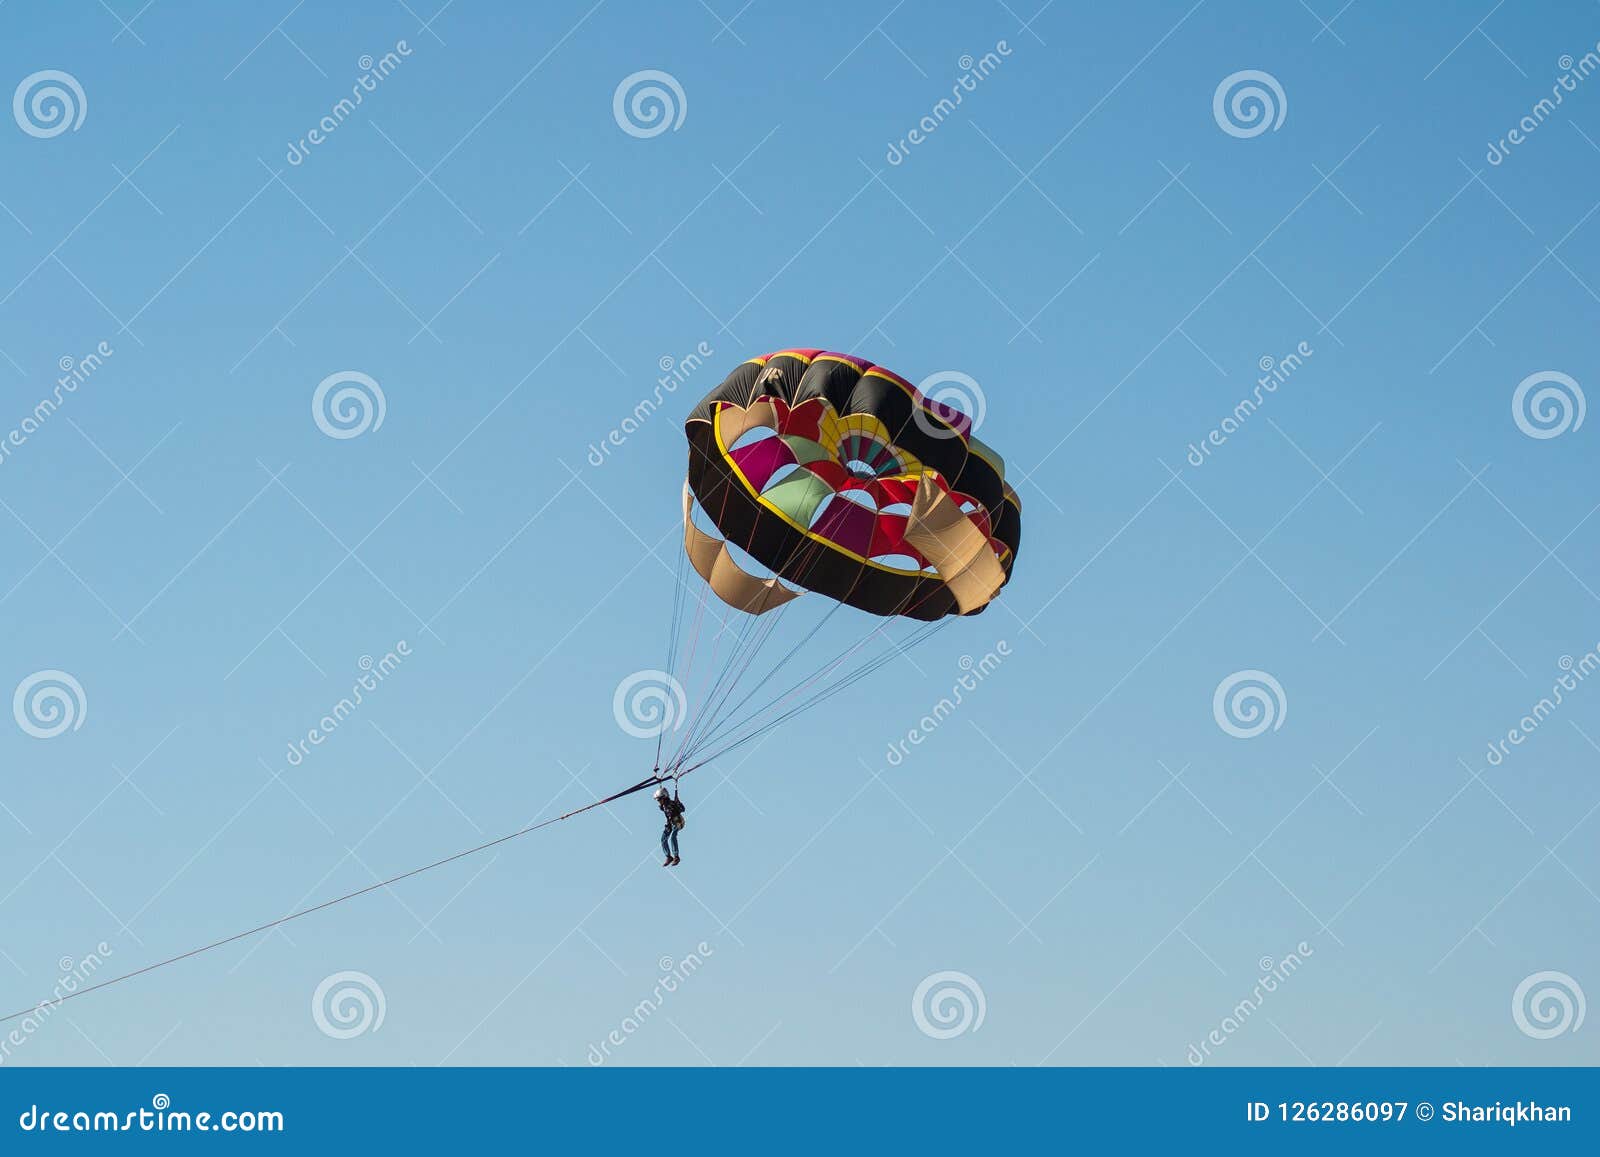 People On A Parachute Behind The Boat - Parasailing Stock 